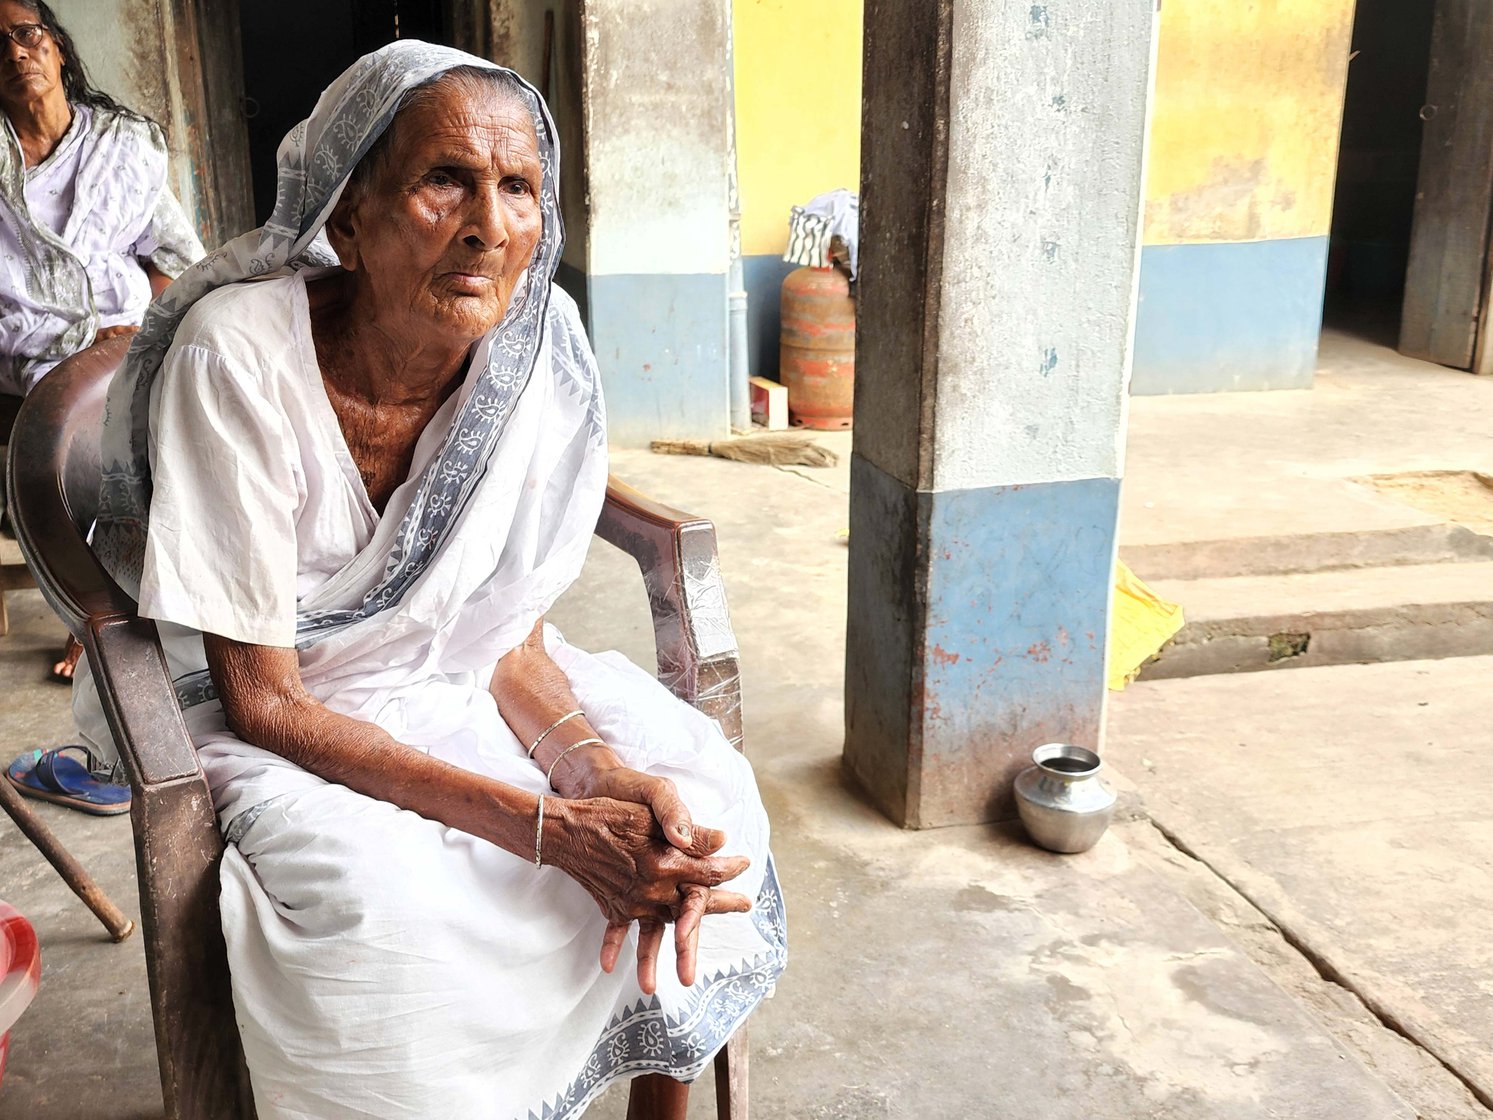 Bhabani ran the family’s farm for decades right from preparing the soil for sowing, to supervising the labour and the harvesting. She even transported the produce back home herself